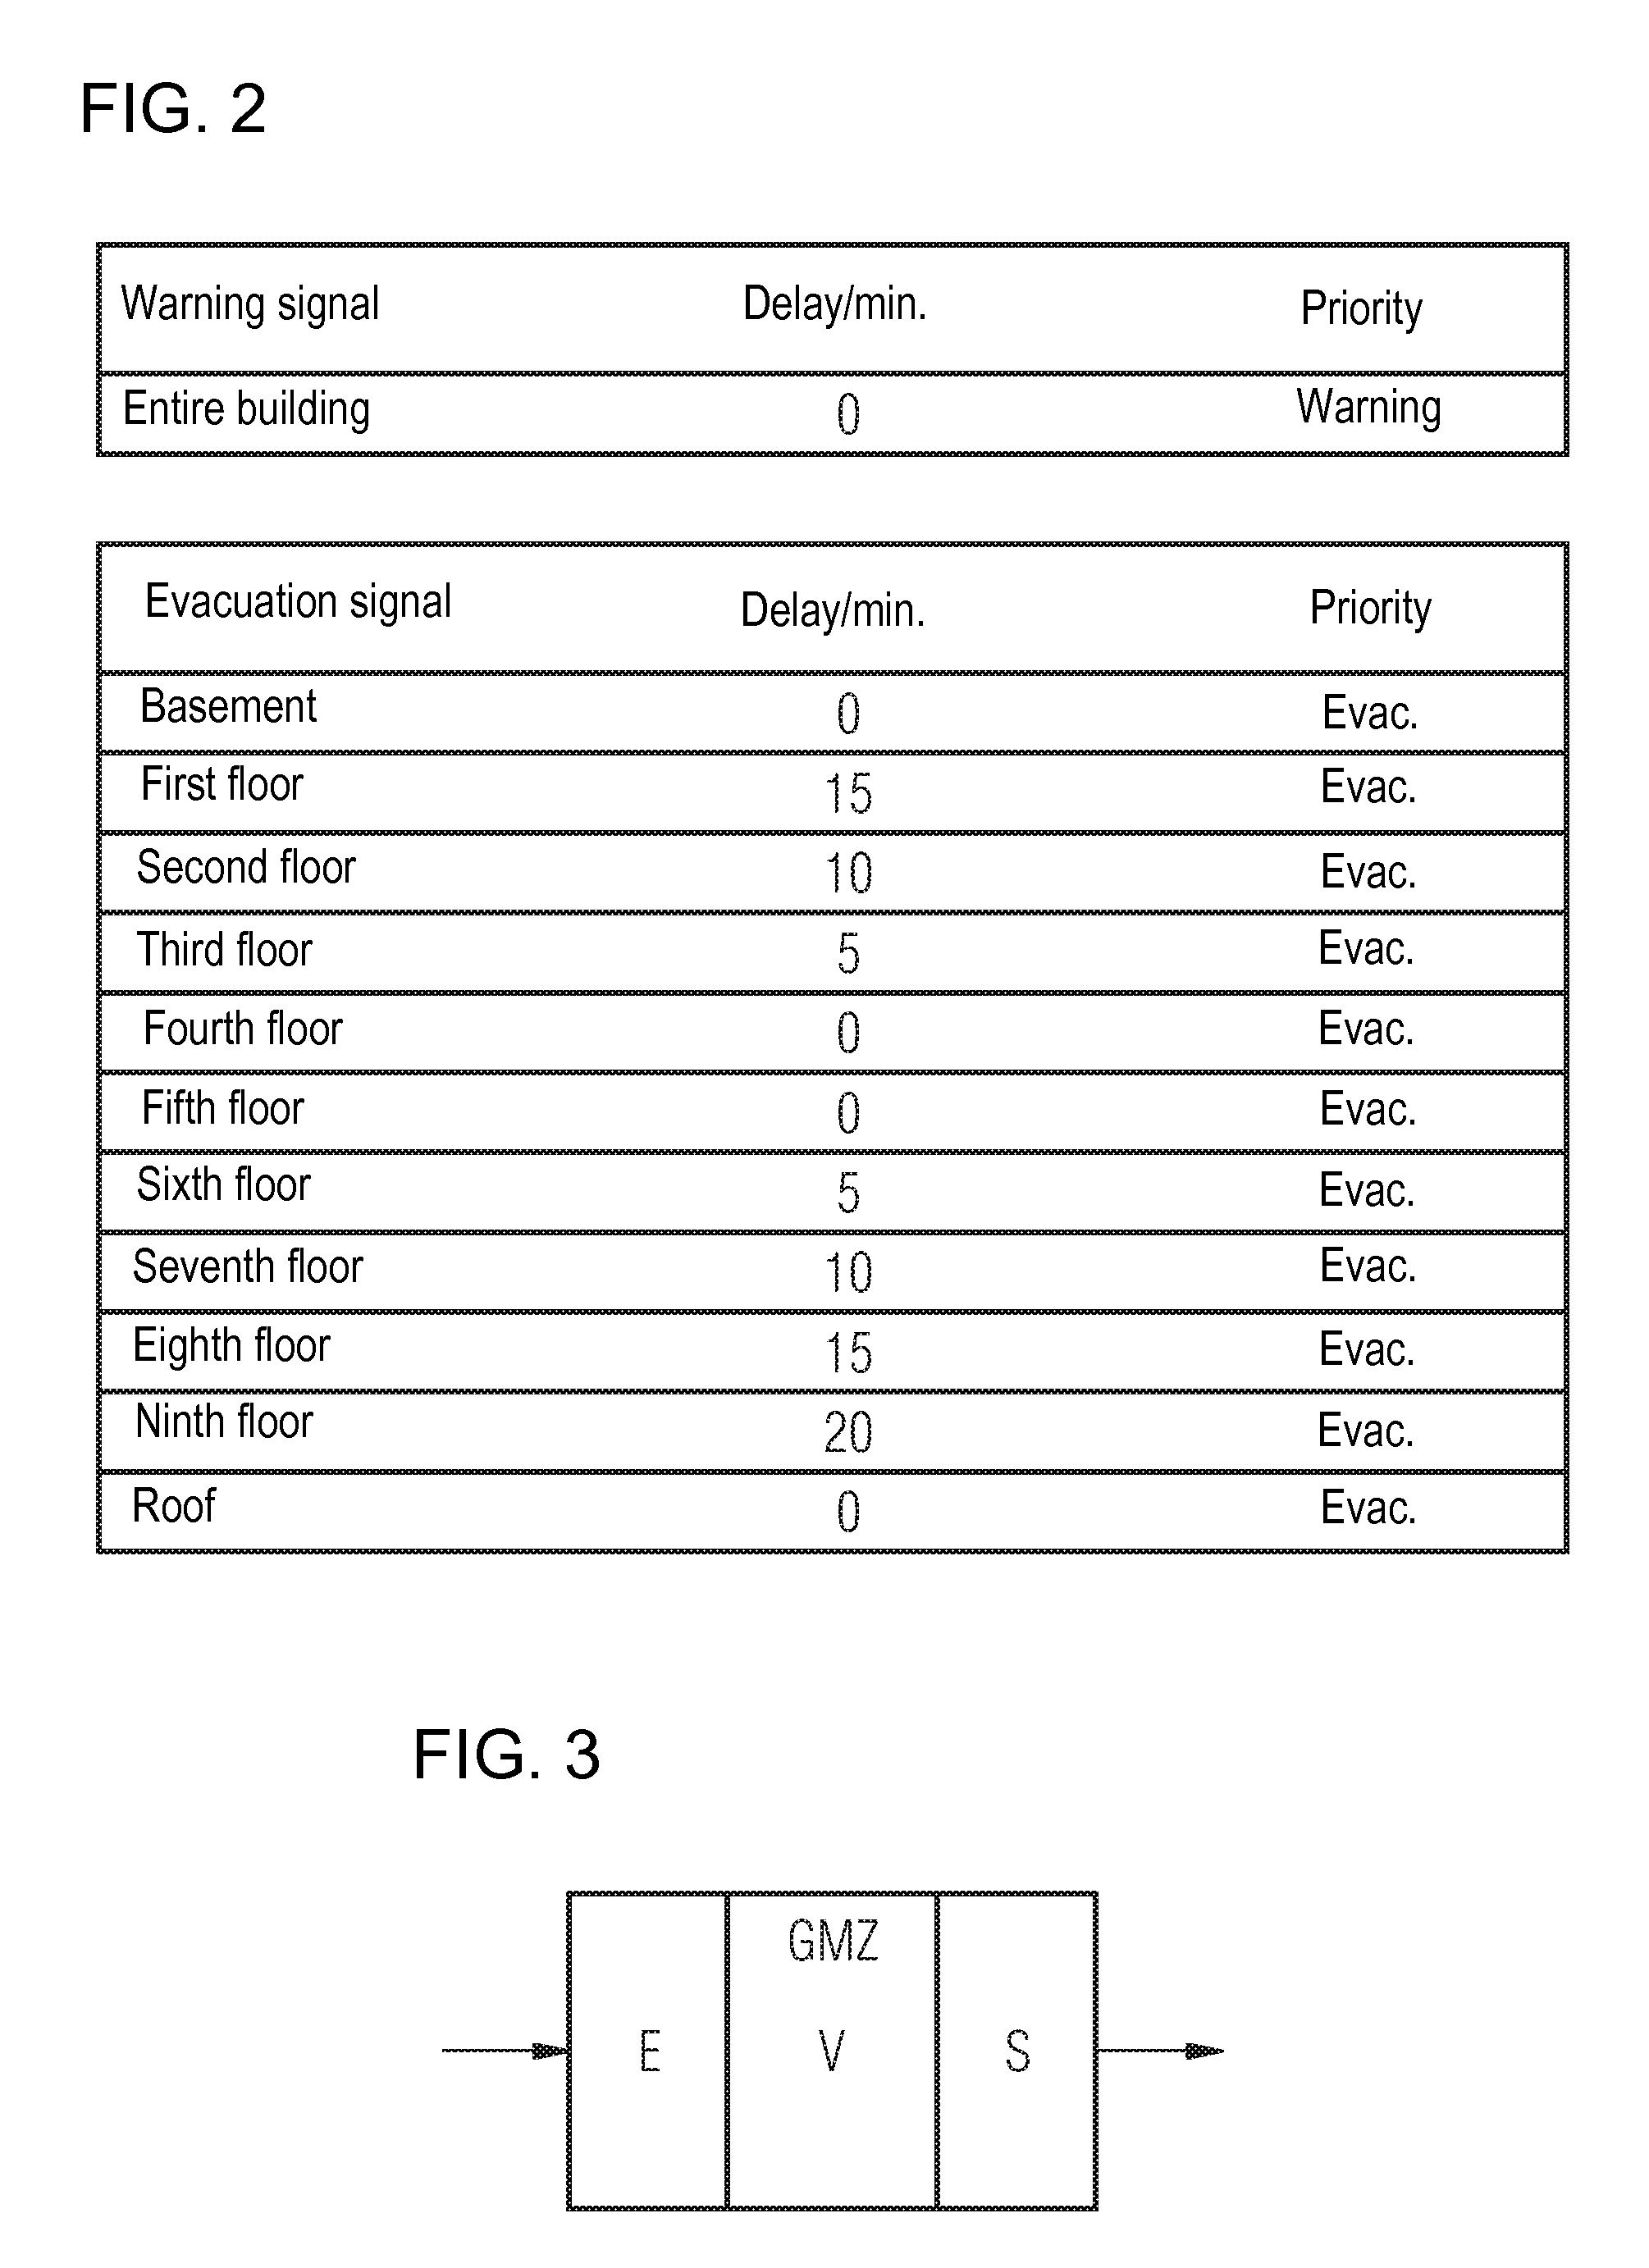 Method for evacuating buildings divided into sections